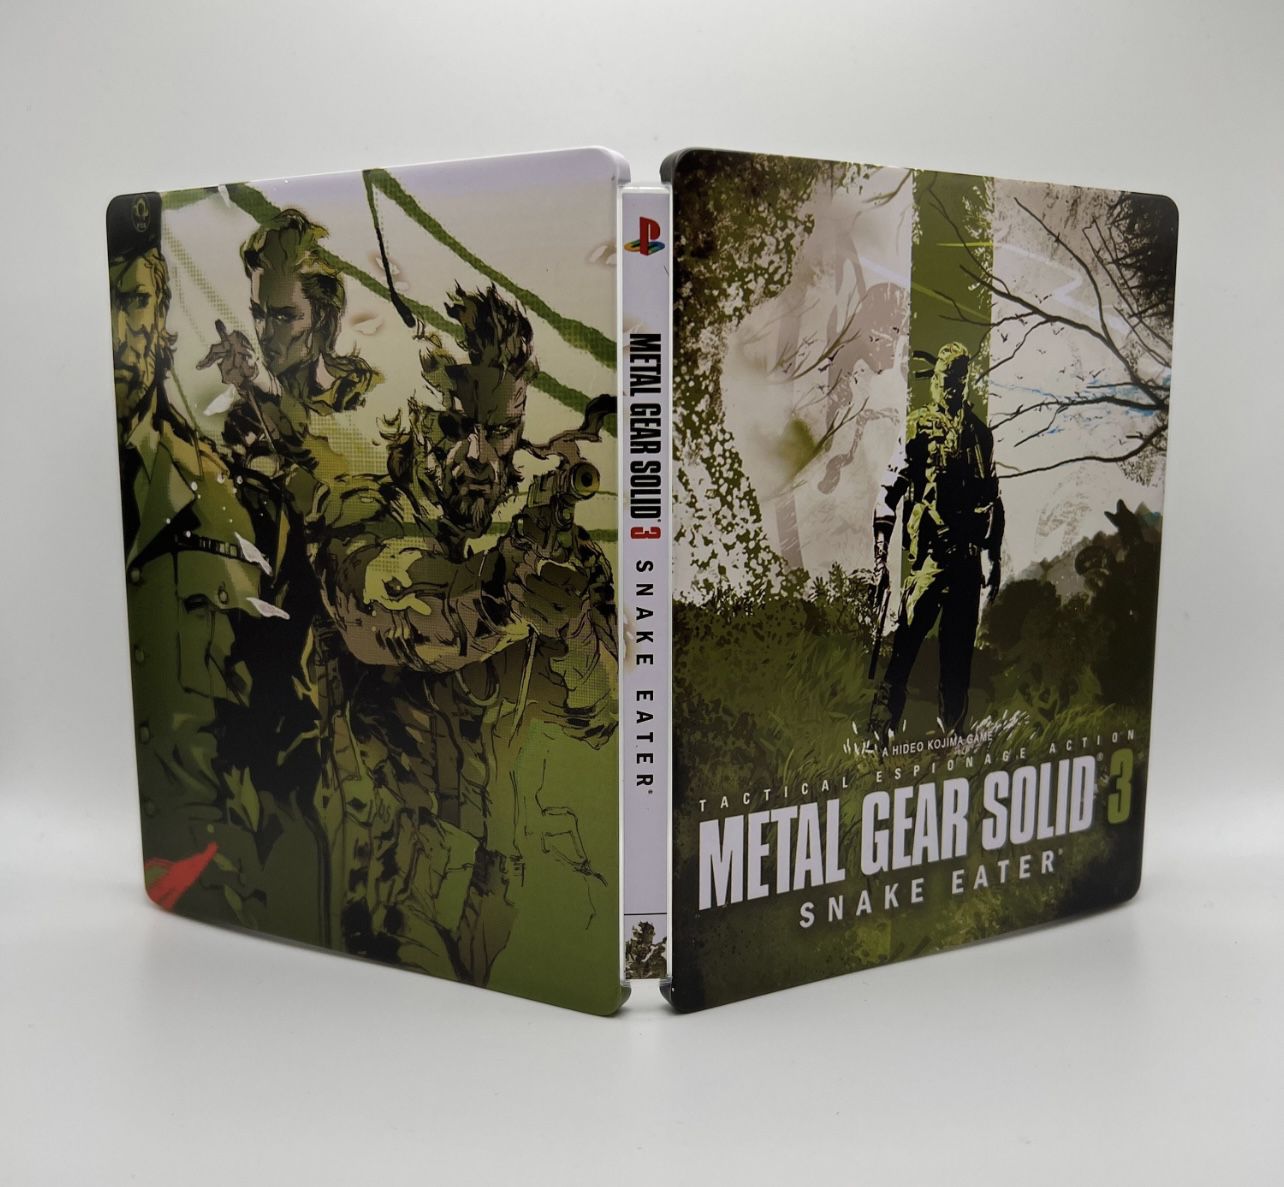 Metal Gear Solid 3: Snake Eater Custom made Steelbook Case for PS3/PS4/PS5/Xbox (No Game) New